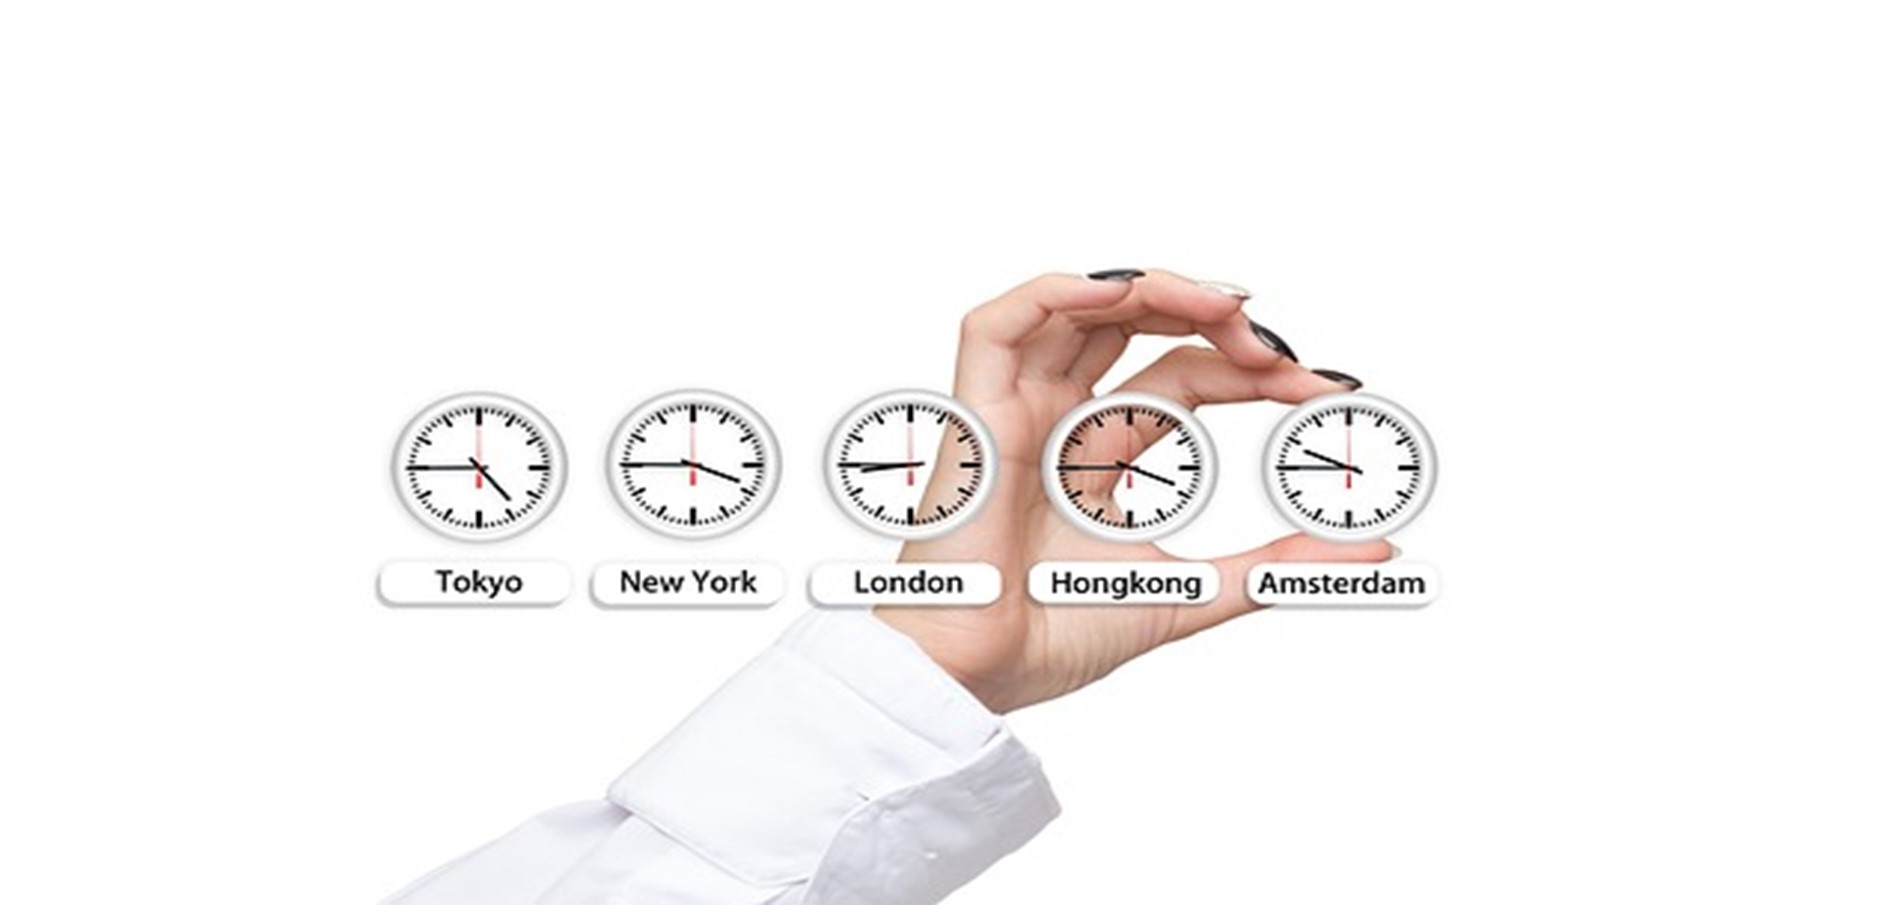 forex or stocks markets opening hours clocks